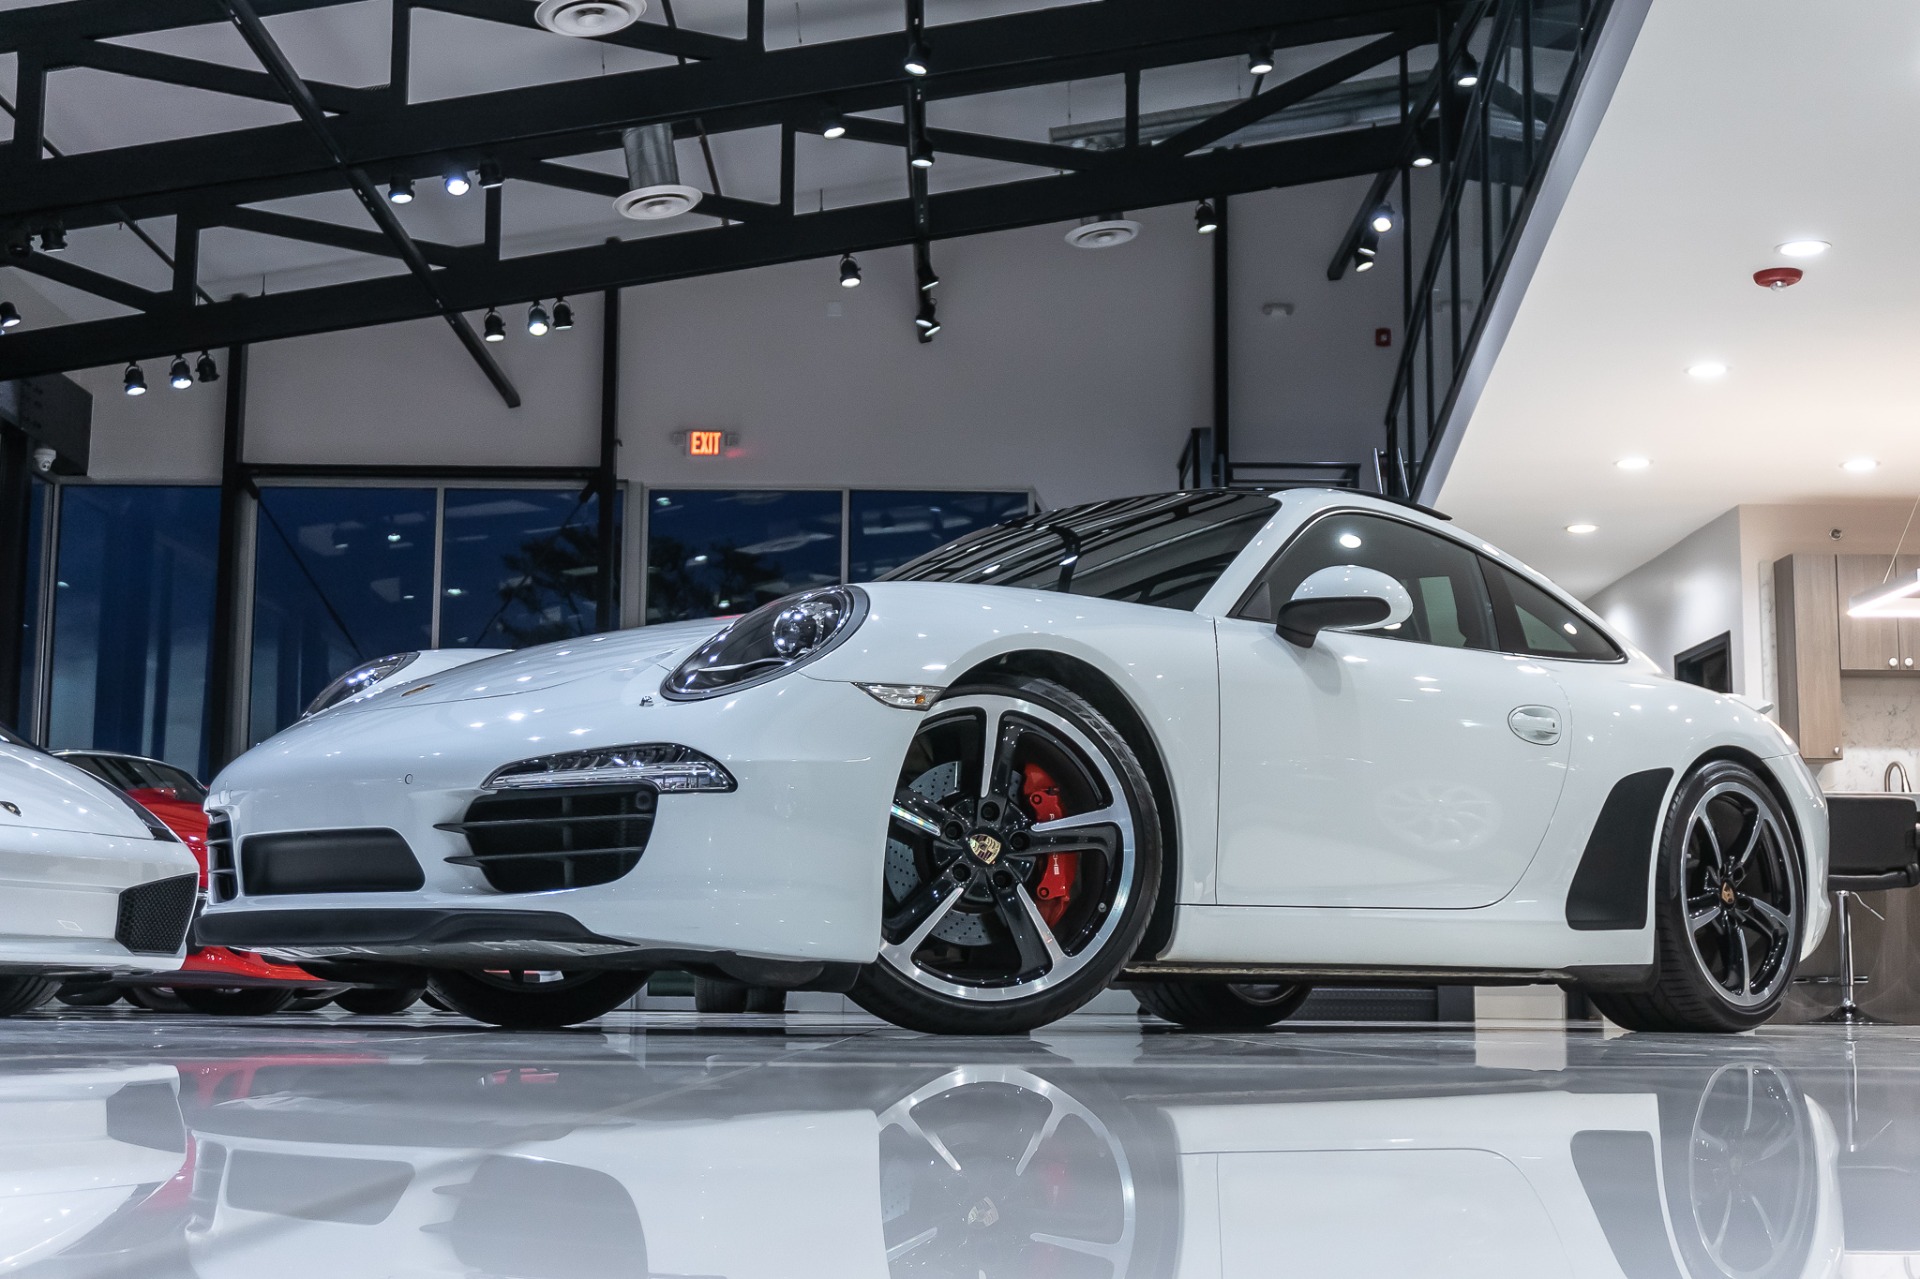 Used-2014-Porsche-911-Carrera-S-Rare-7-Speed-Manual-116k--MSRP-Loaded